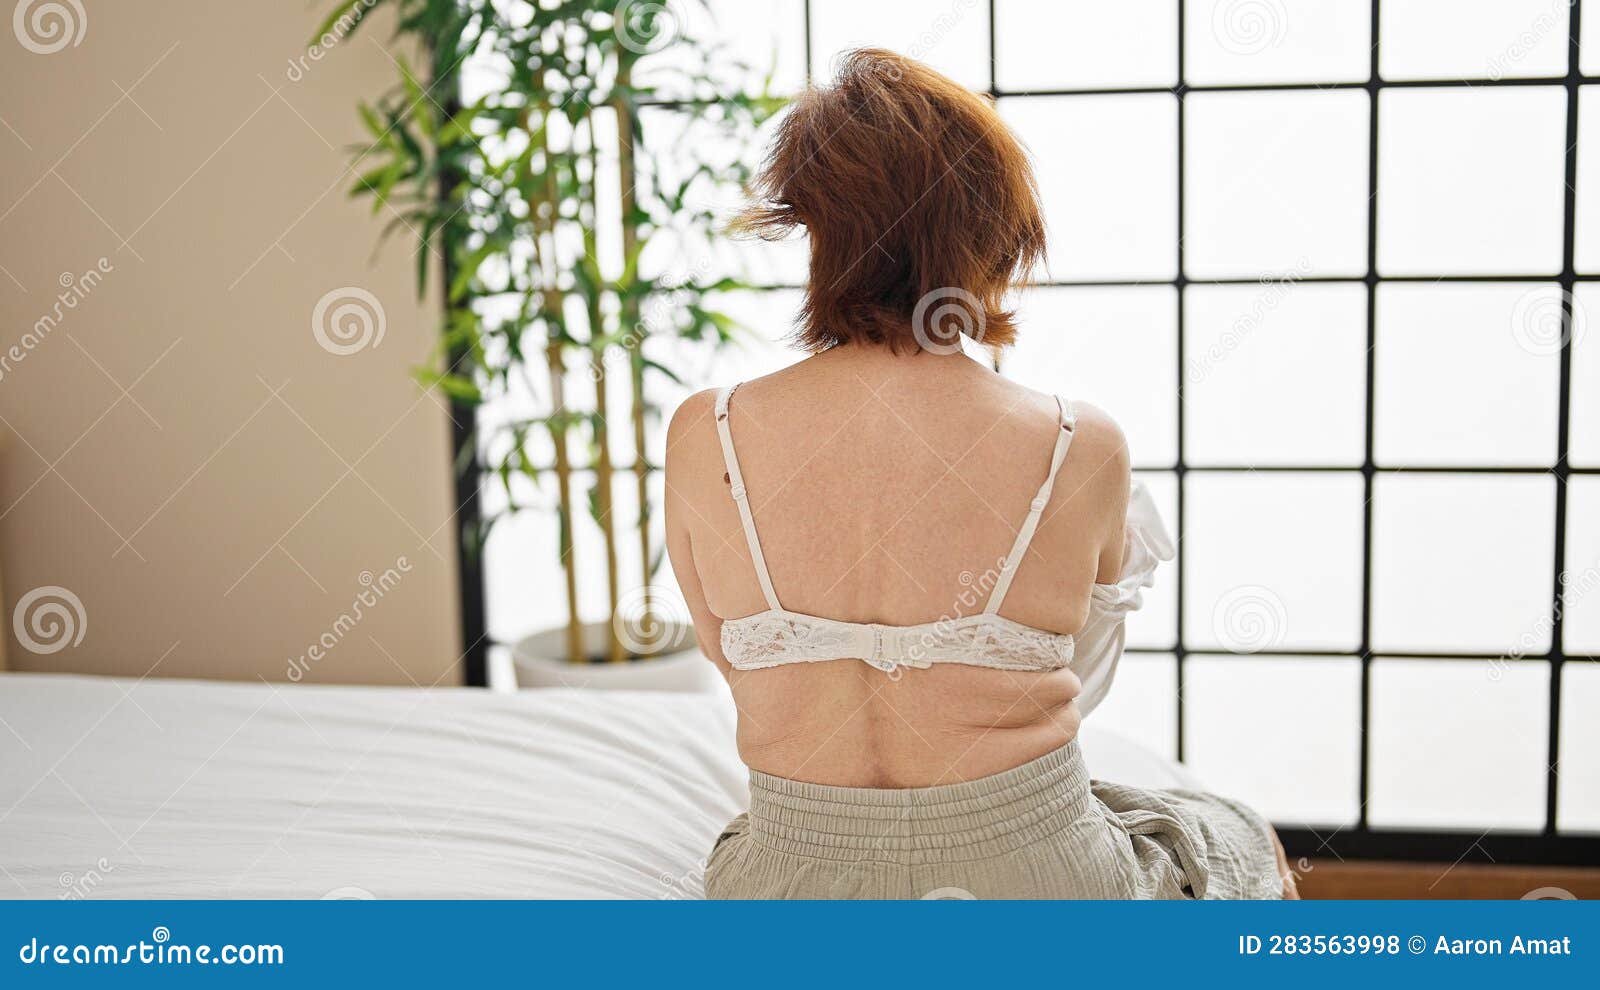 Naked Woman Taking Off Or Putting On Bra Behind The Glass. Stock Photo,  Picture and Royalty Free Image. Image 117774632.